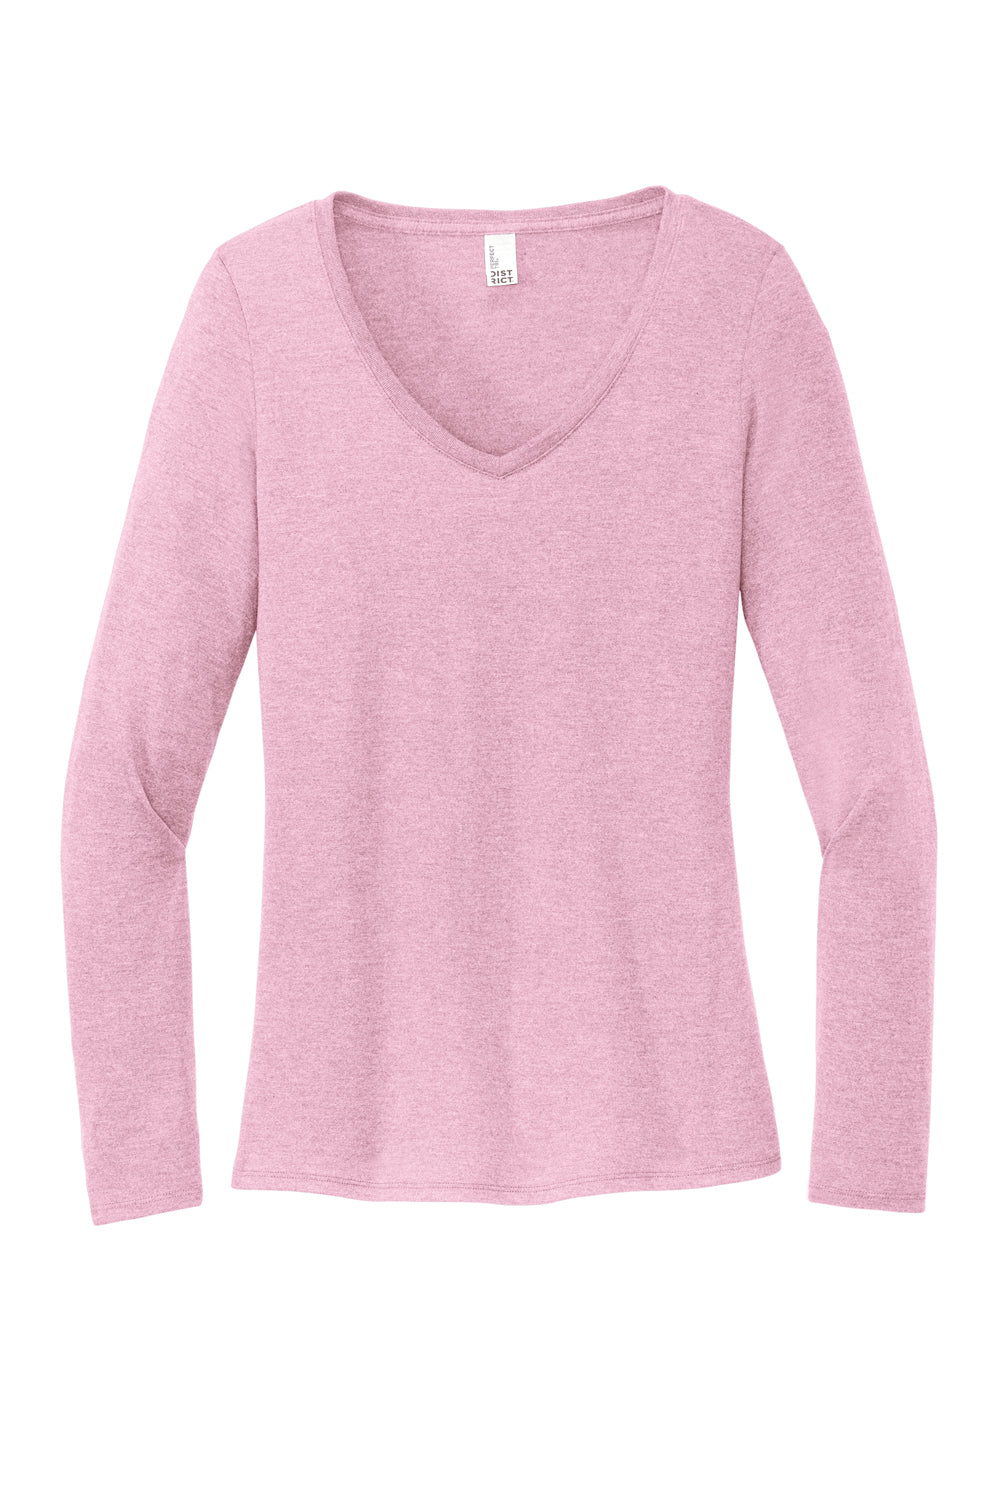 District DT135 Womens Perfect Tri Long Sleeve V-Neck T-Shirt Heather Wisteria Pink Flat Front